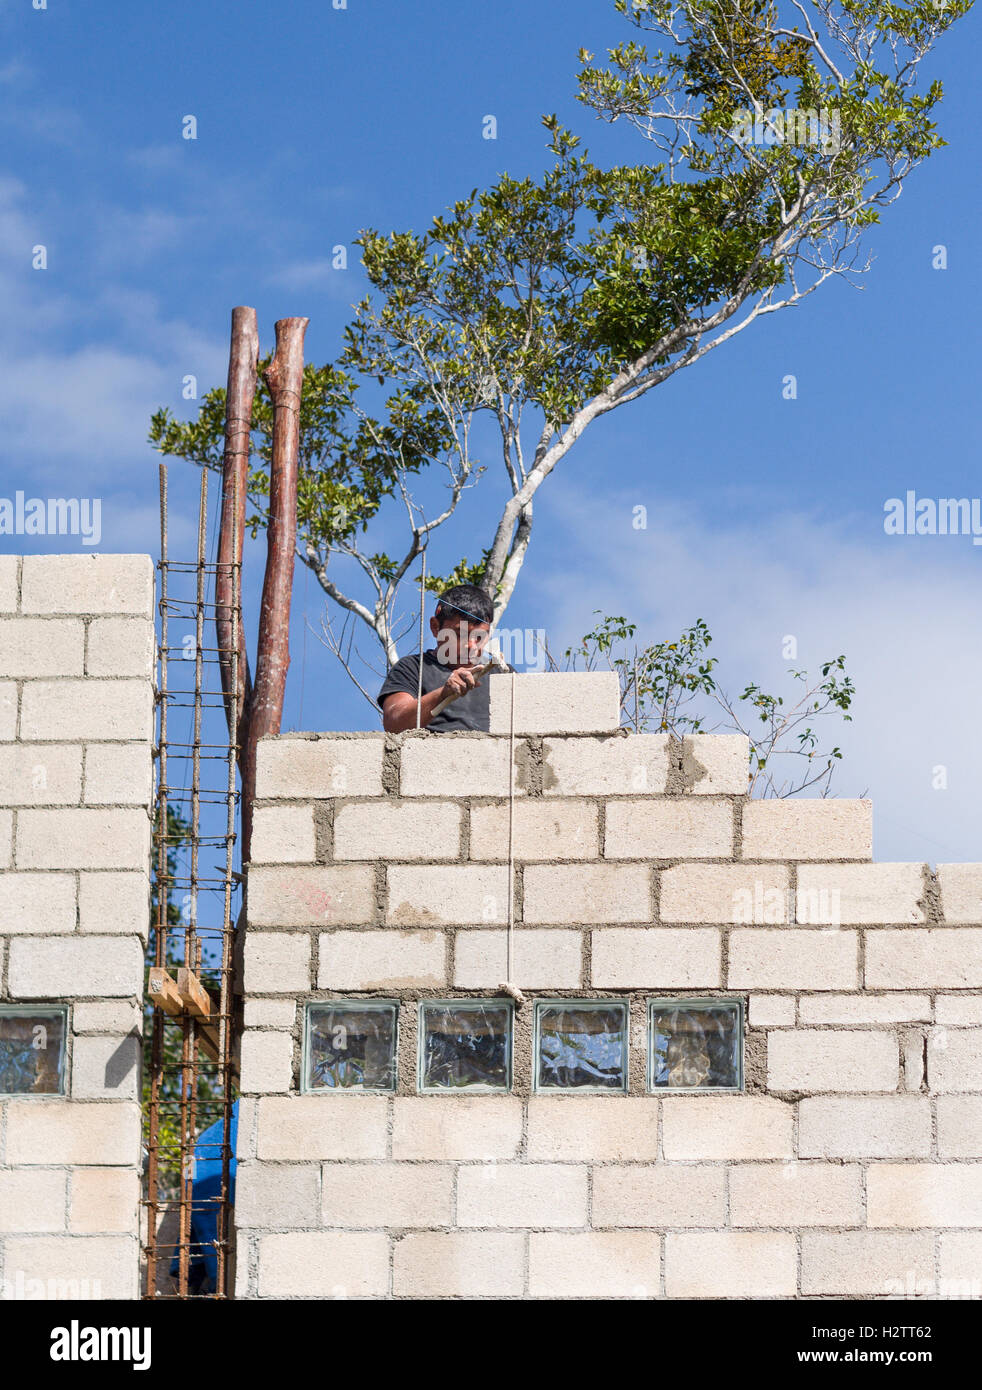 Bricklaying: building a wall. A bricklayer places a concrete block high up on a newly constructed cinder block wall Stock Photo